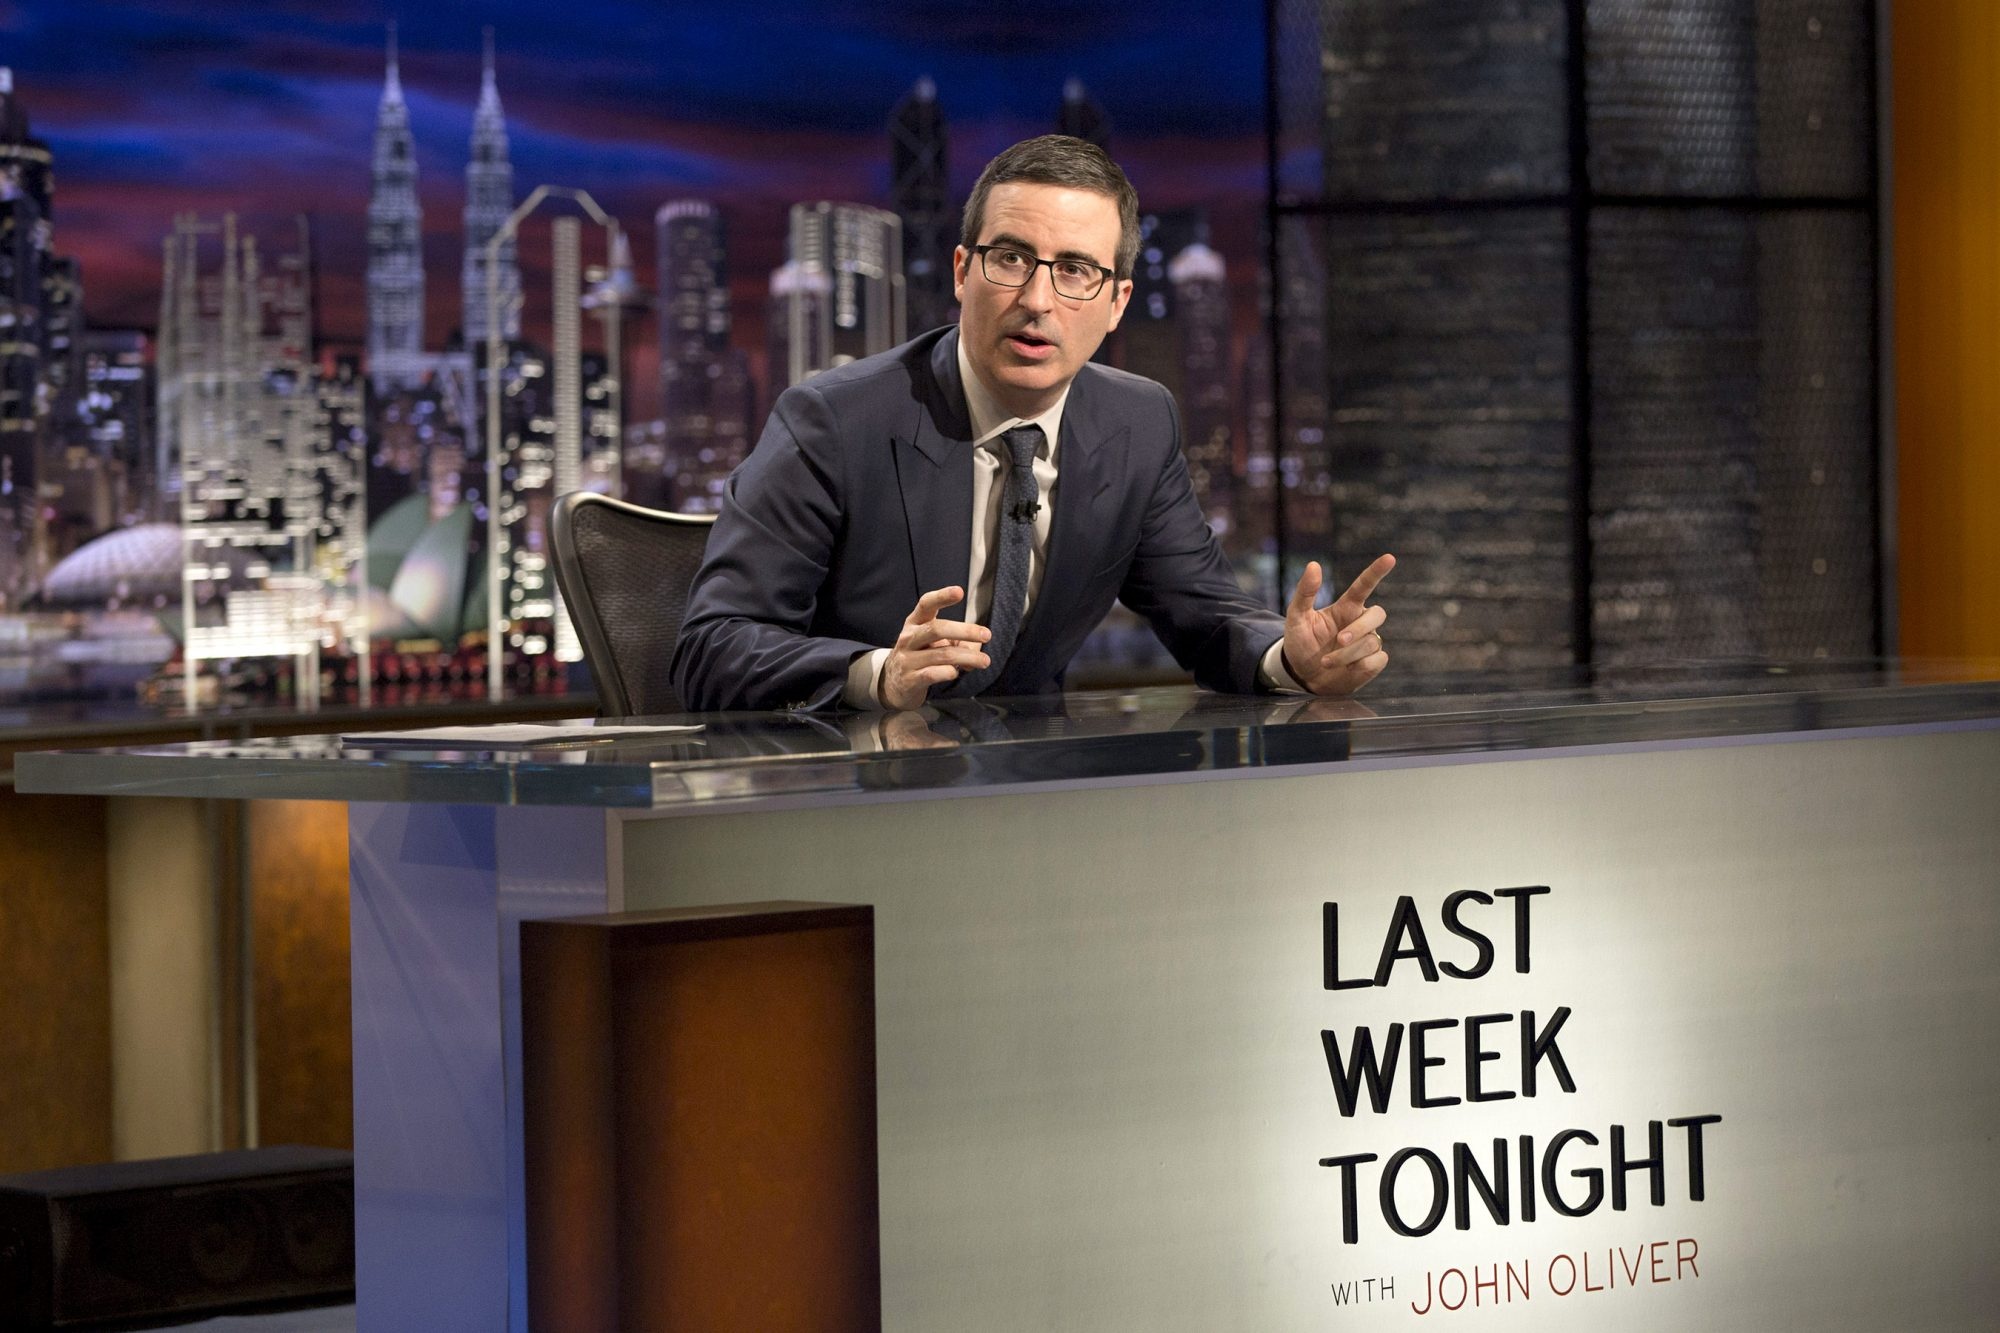 Satirical commentary, John Oliver, Current events, Television show, 2000x1340 HD Desktop